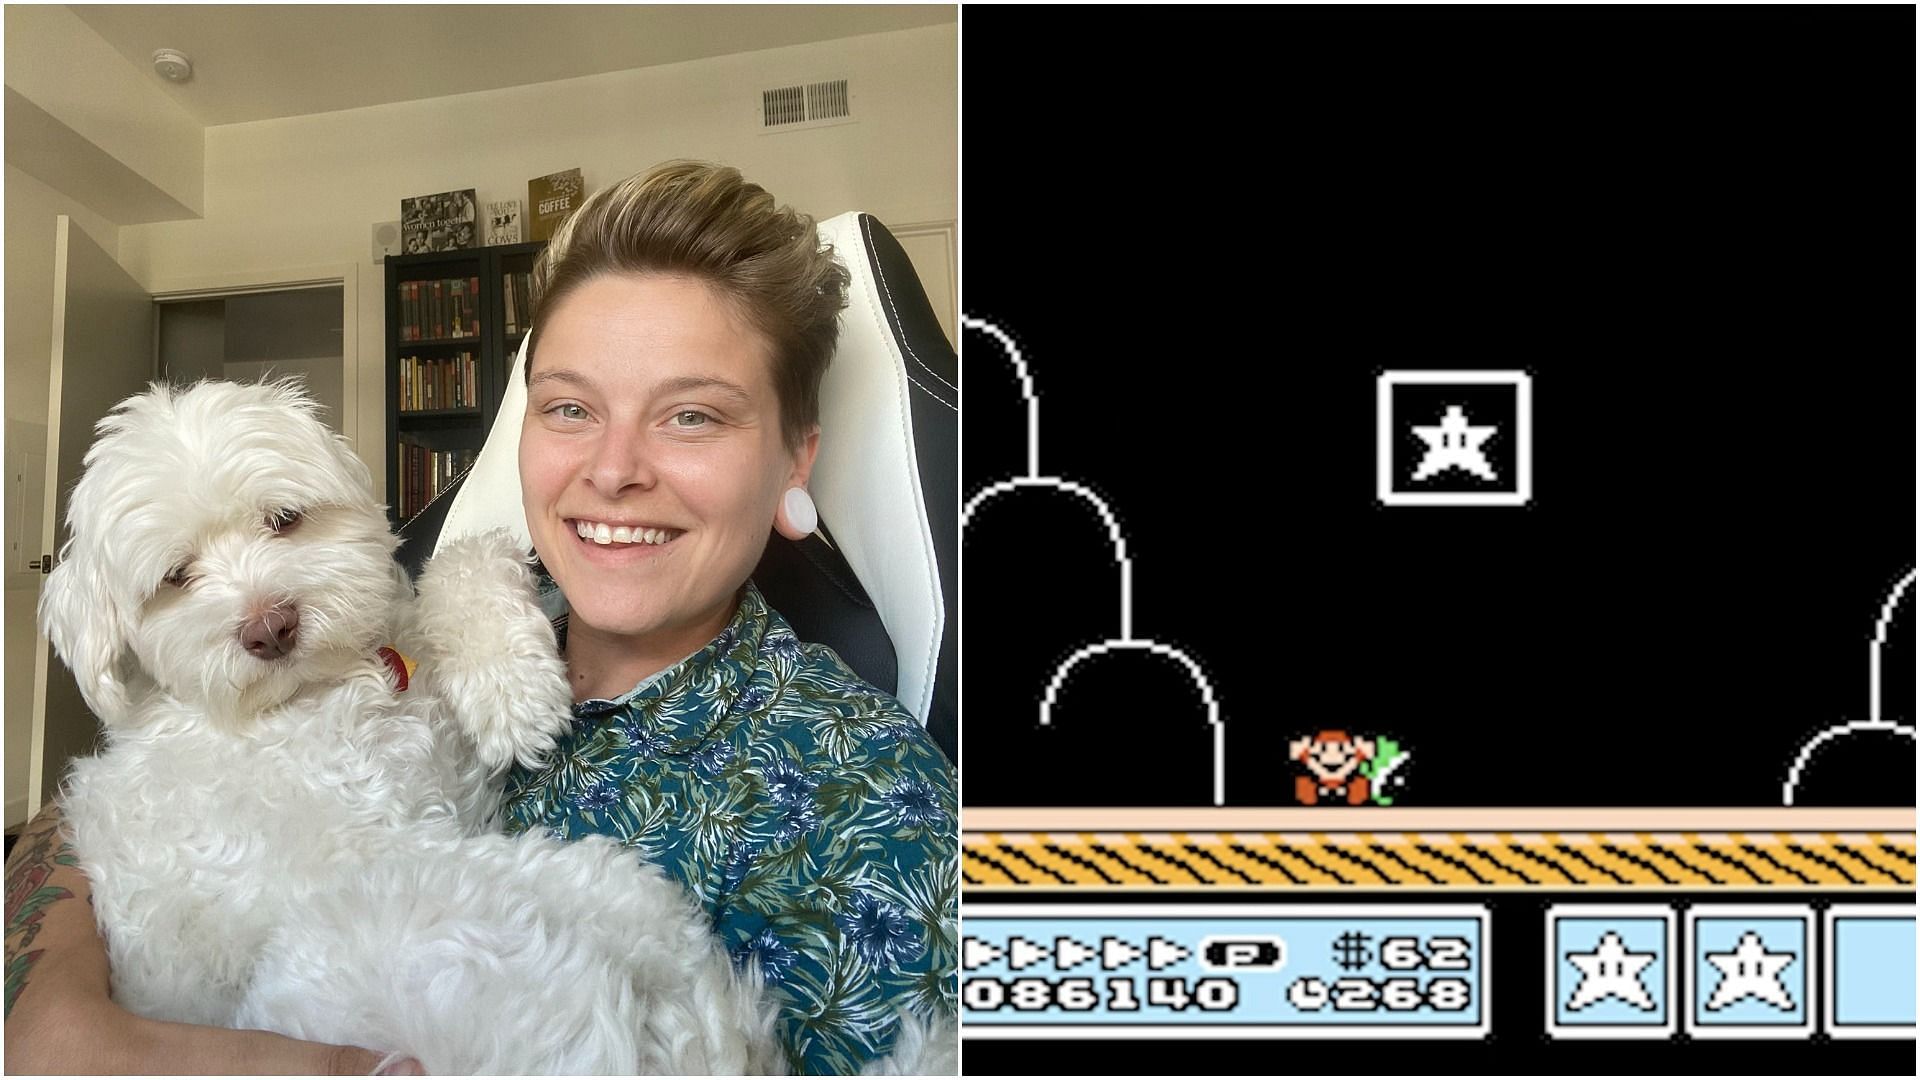 Streamer dies in Super Mario 3 right as they are about to finish the level (Image via Sportskeeda)